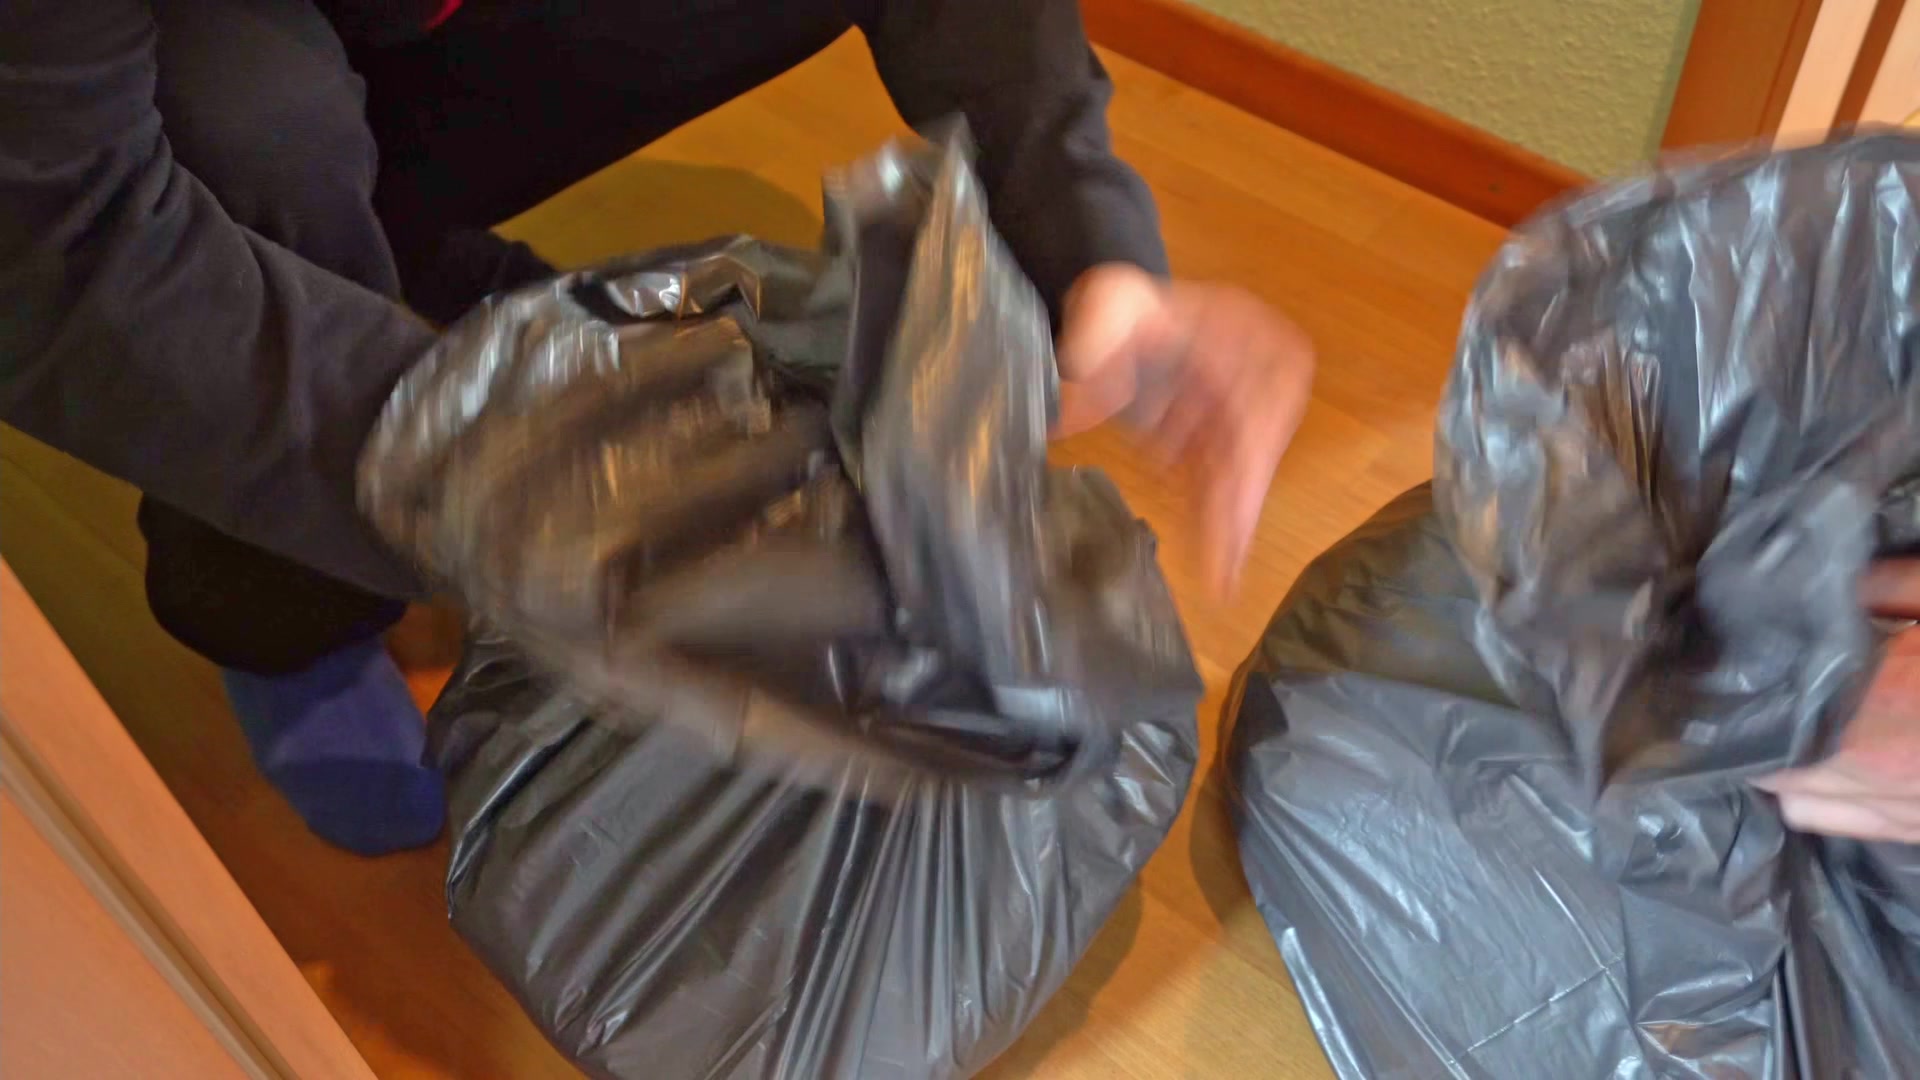 Moving diapers in second trashbag (TOO HEAVY trash)